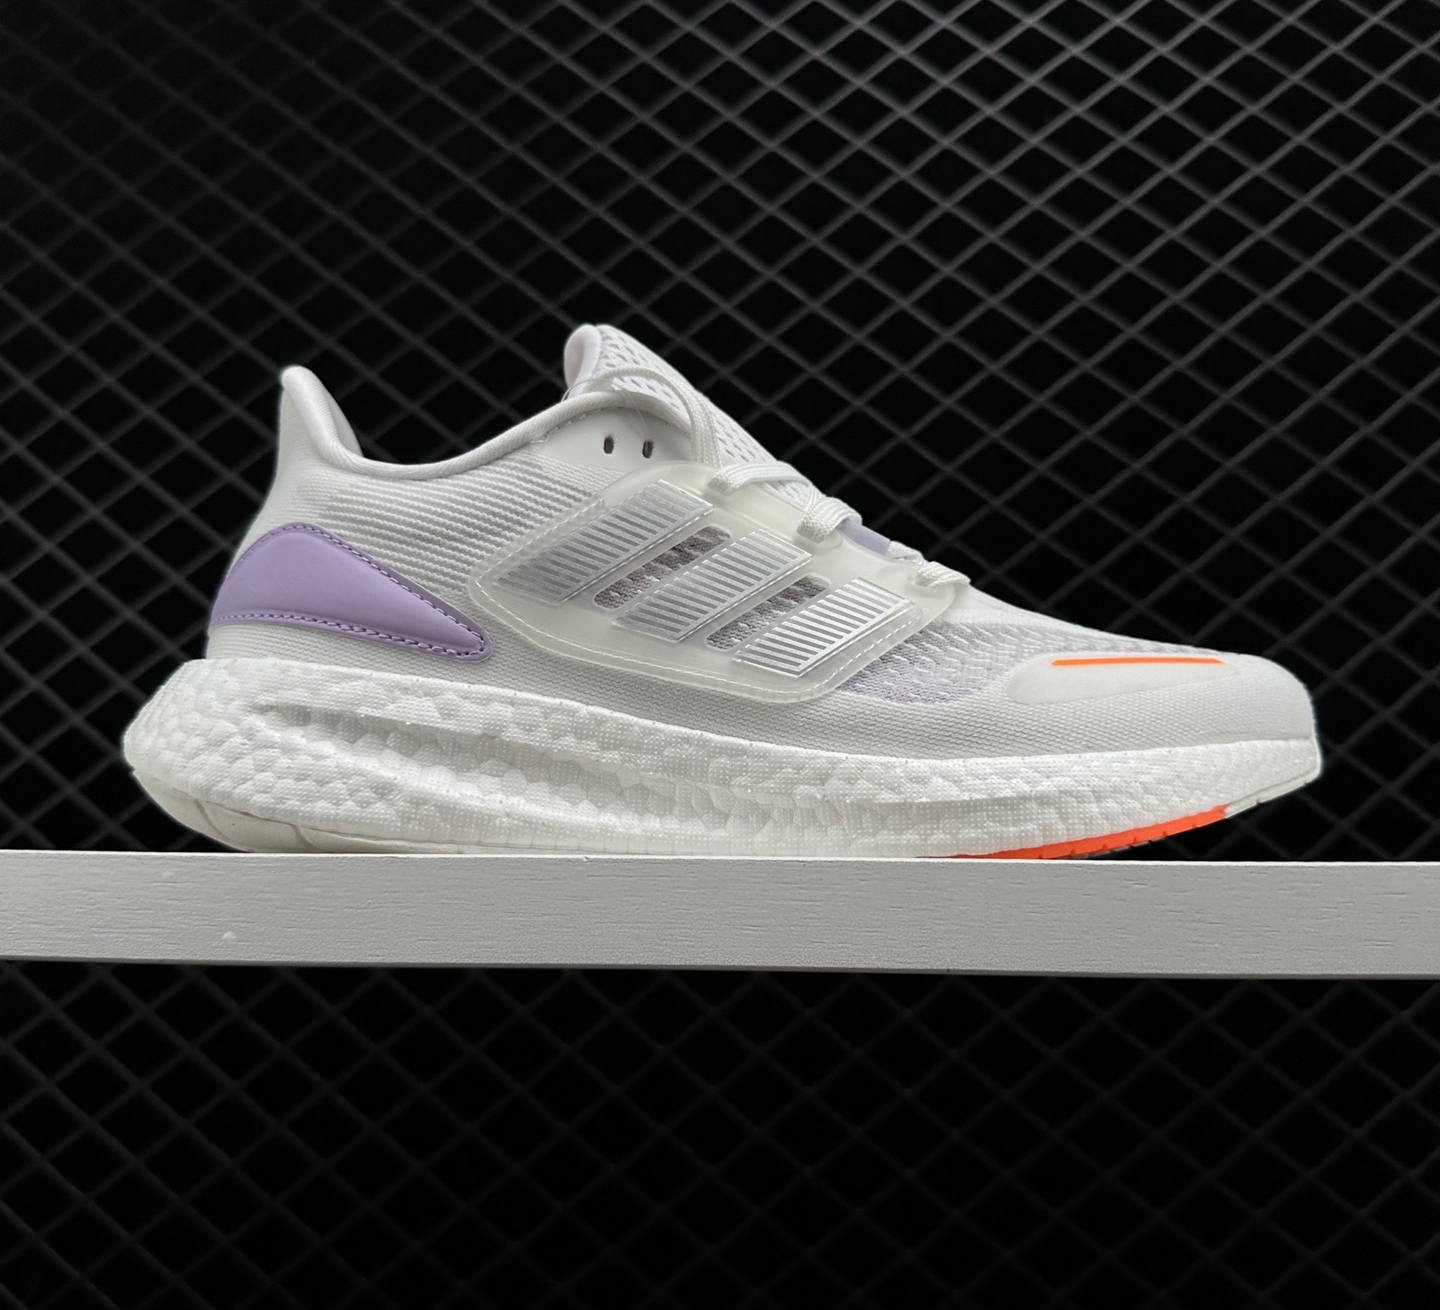 Adidas Pureboost 22 'White' HQ1420 - Boost Your Performance!